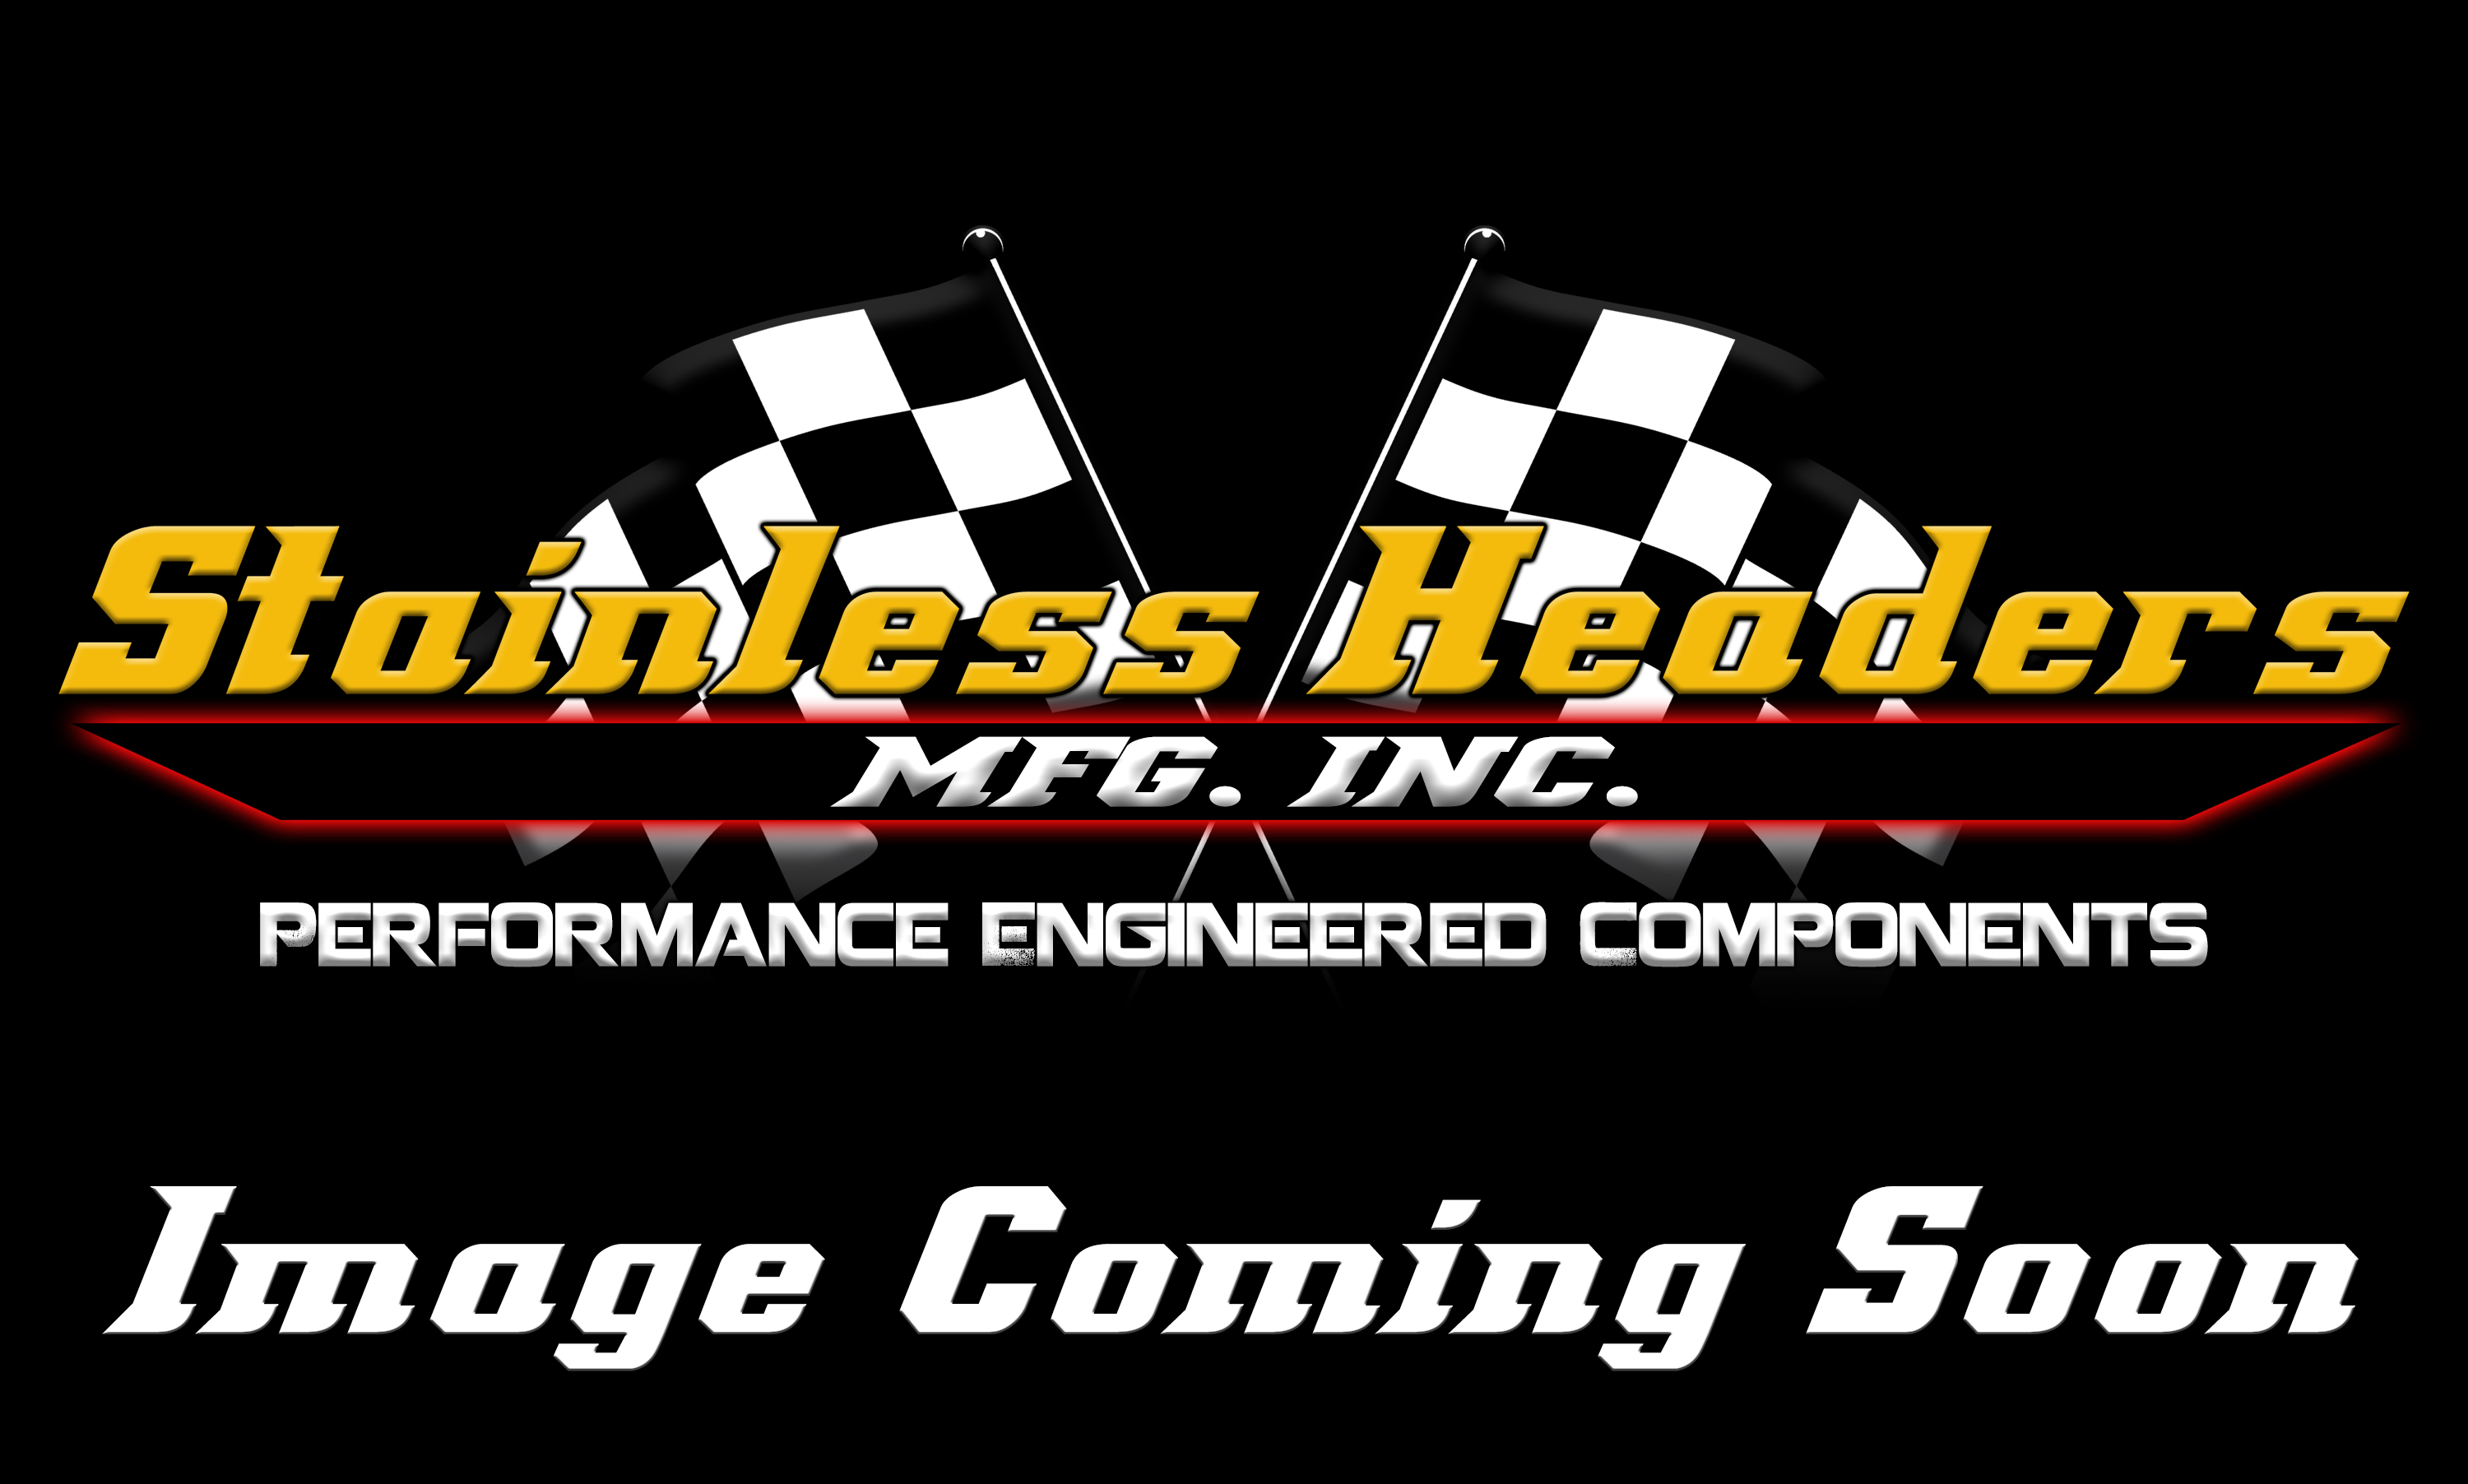 Stainless Headers - 1 1/2" Primary 5 into 1 Performance Merge Collector-16ga 321ss